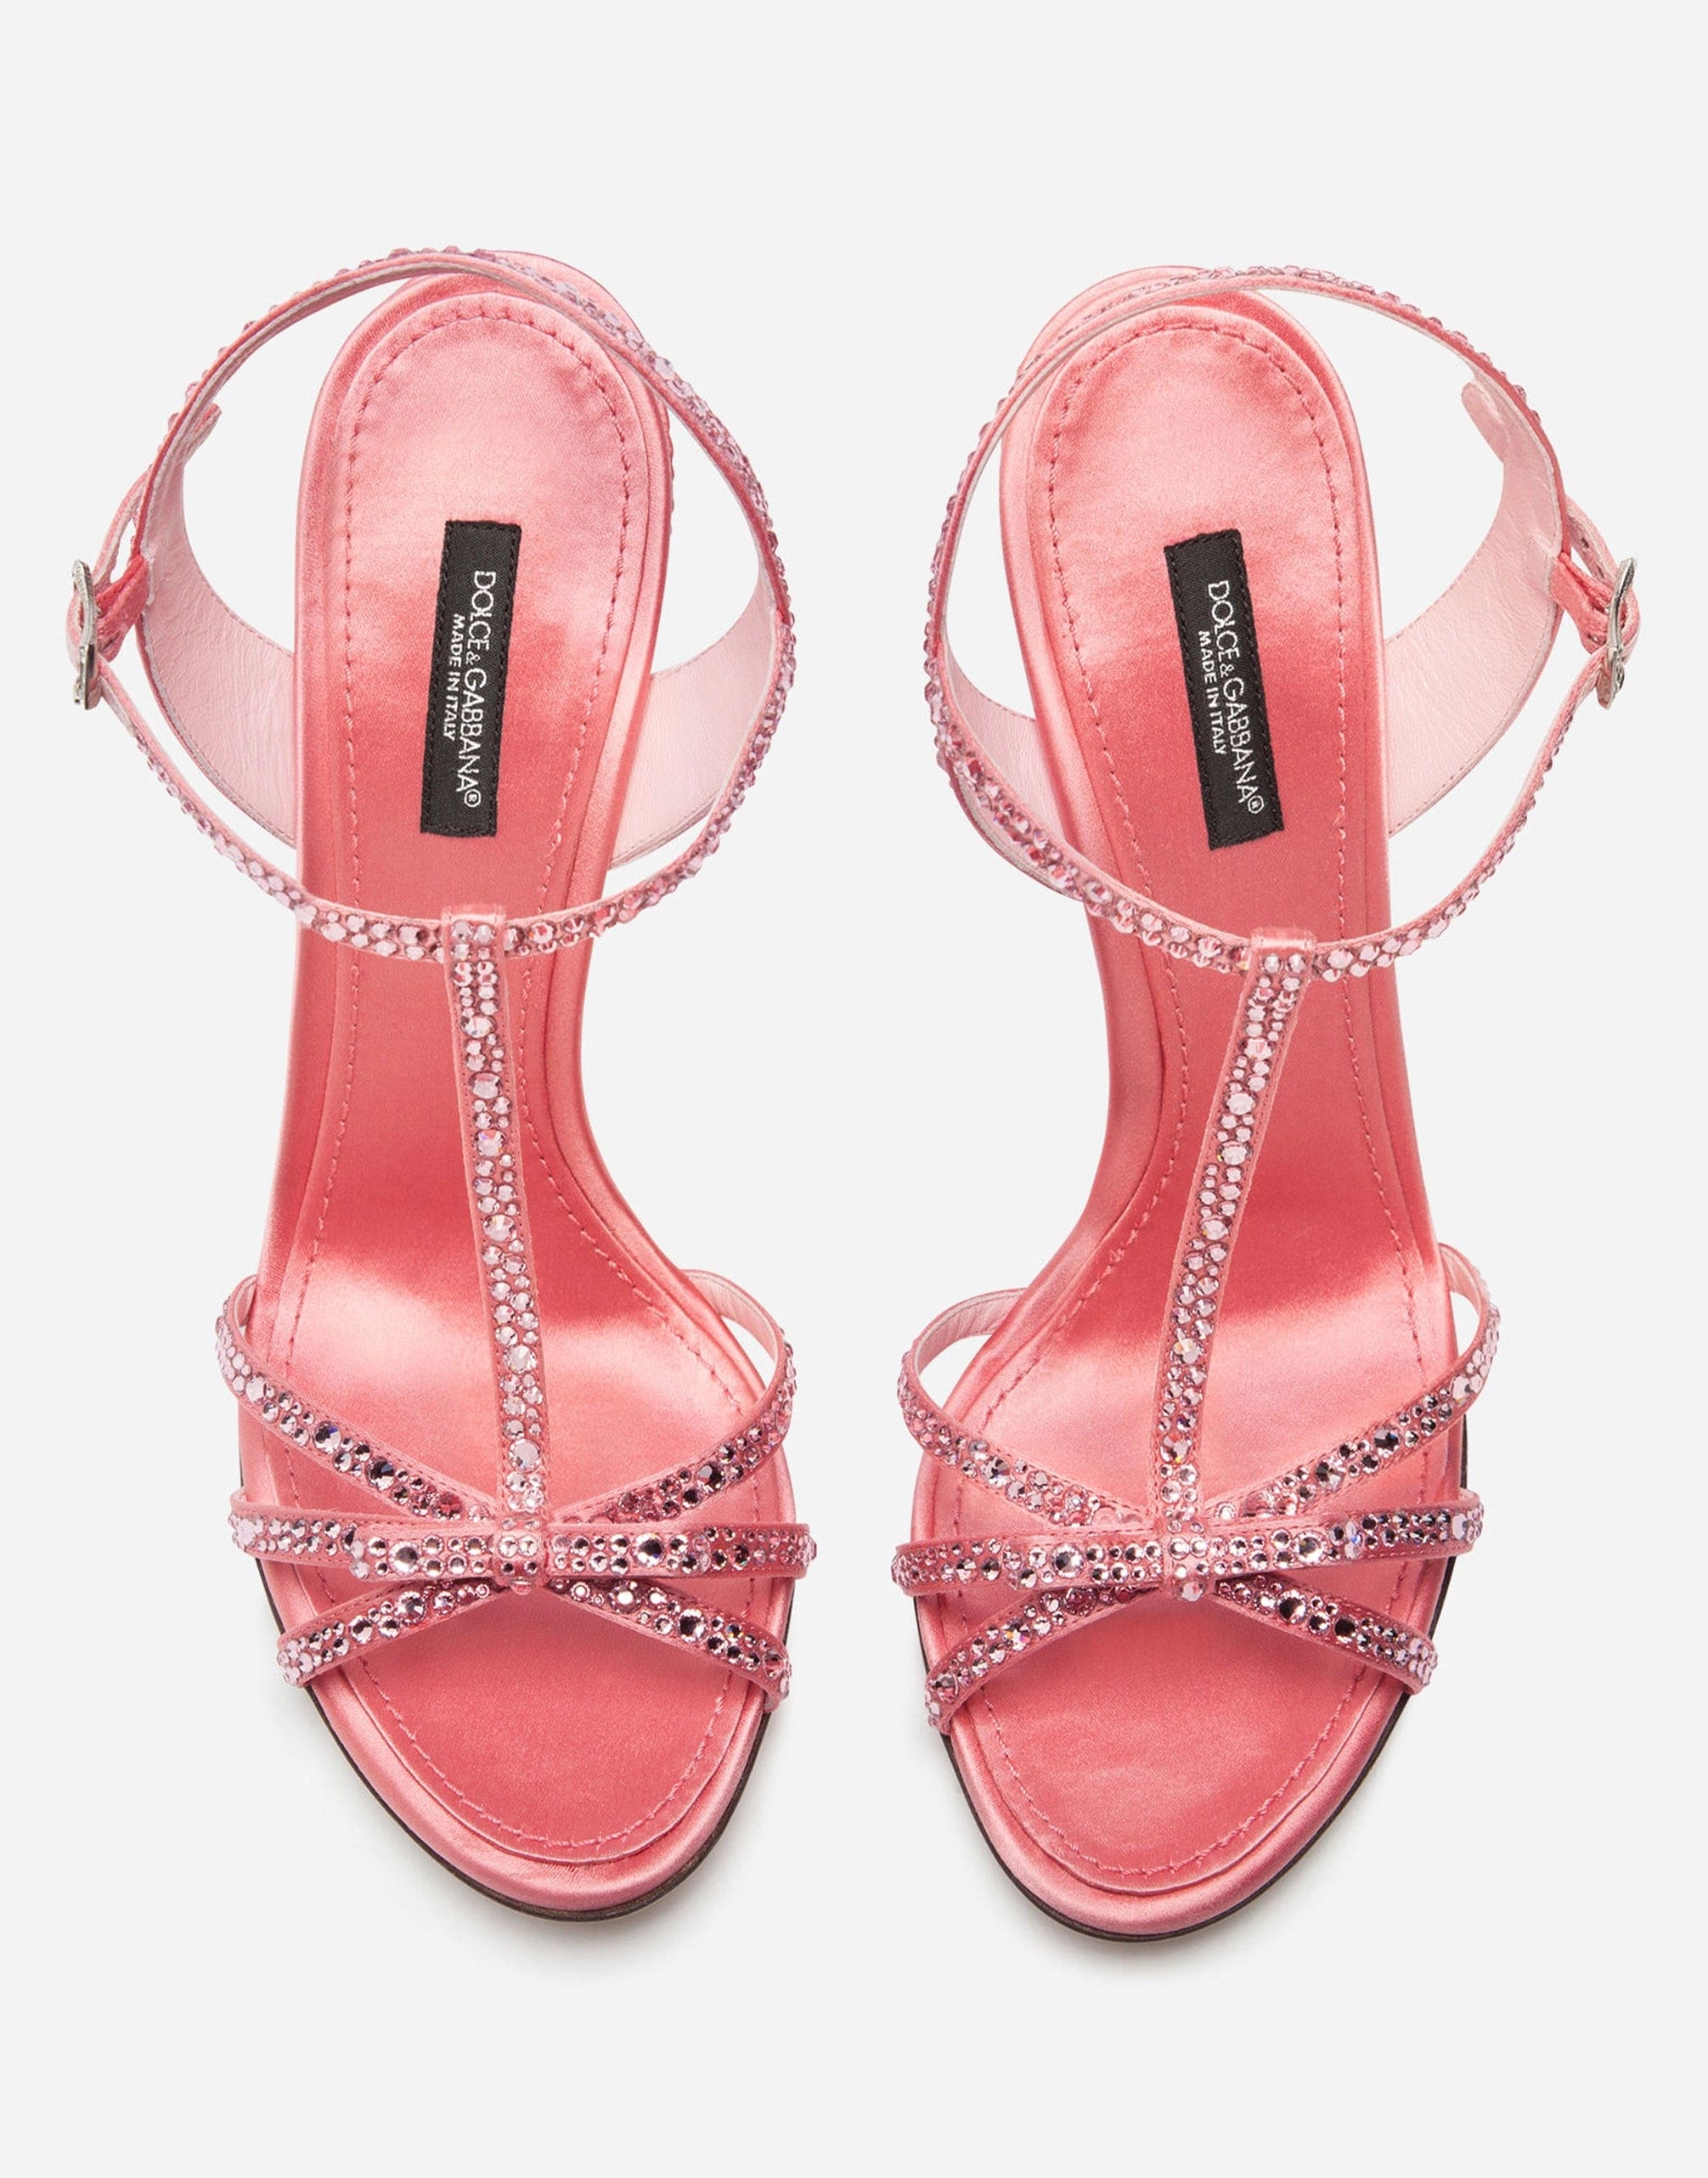 Dolce & Gabbana Satin Sandals With Crystals